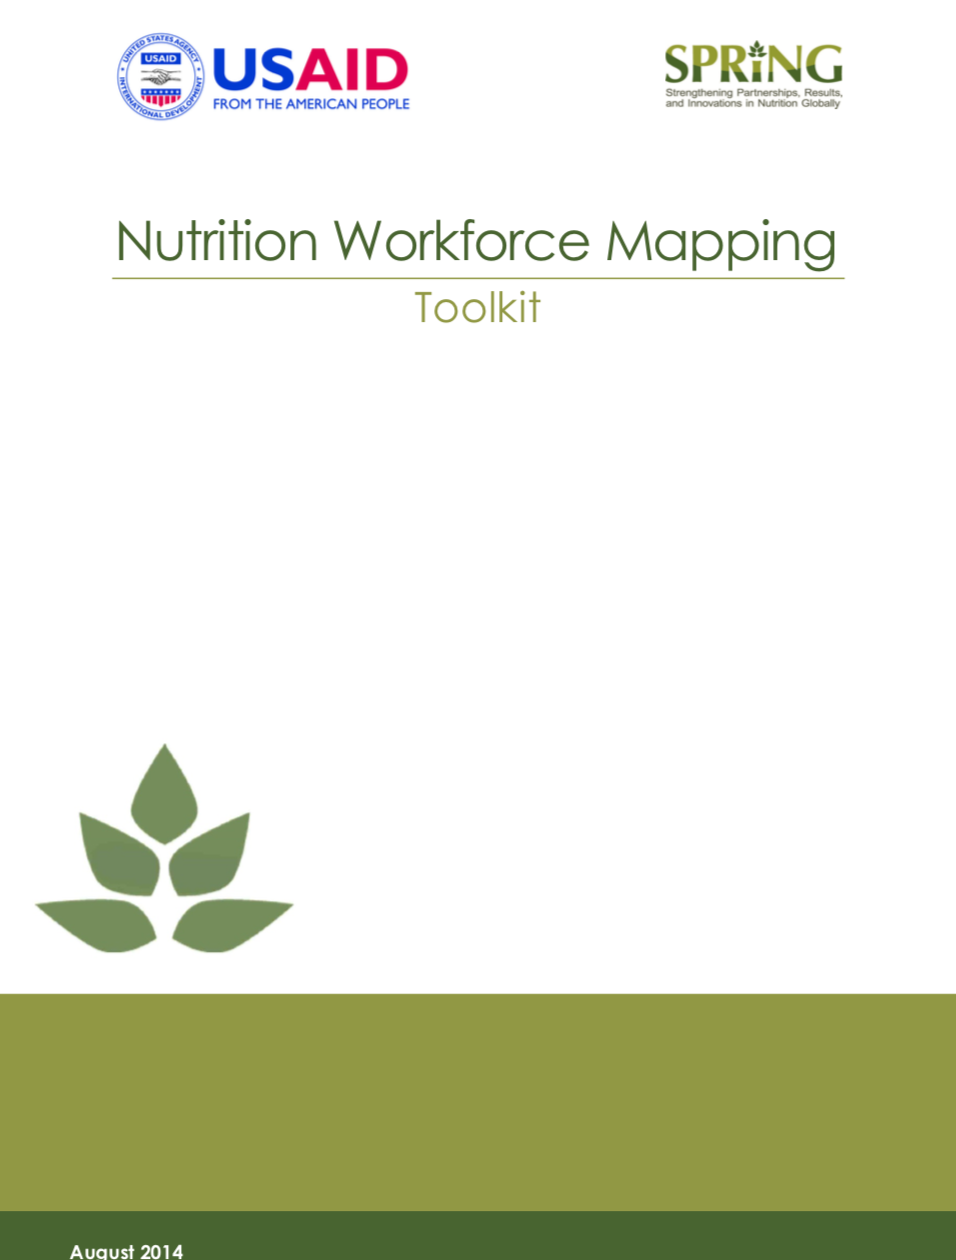 Photo: SPRING_Nutrition Workkit Mapping Toolkit_8.2014 cover